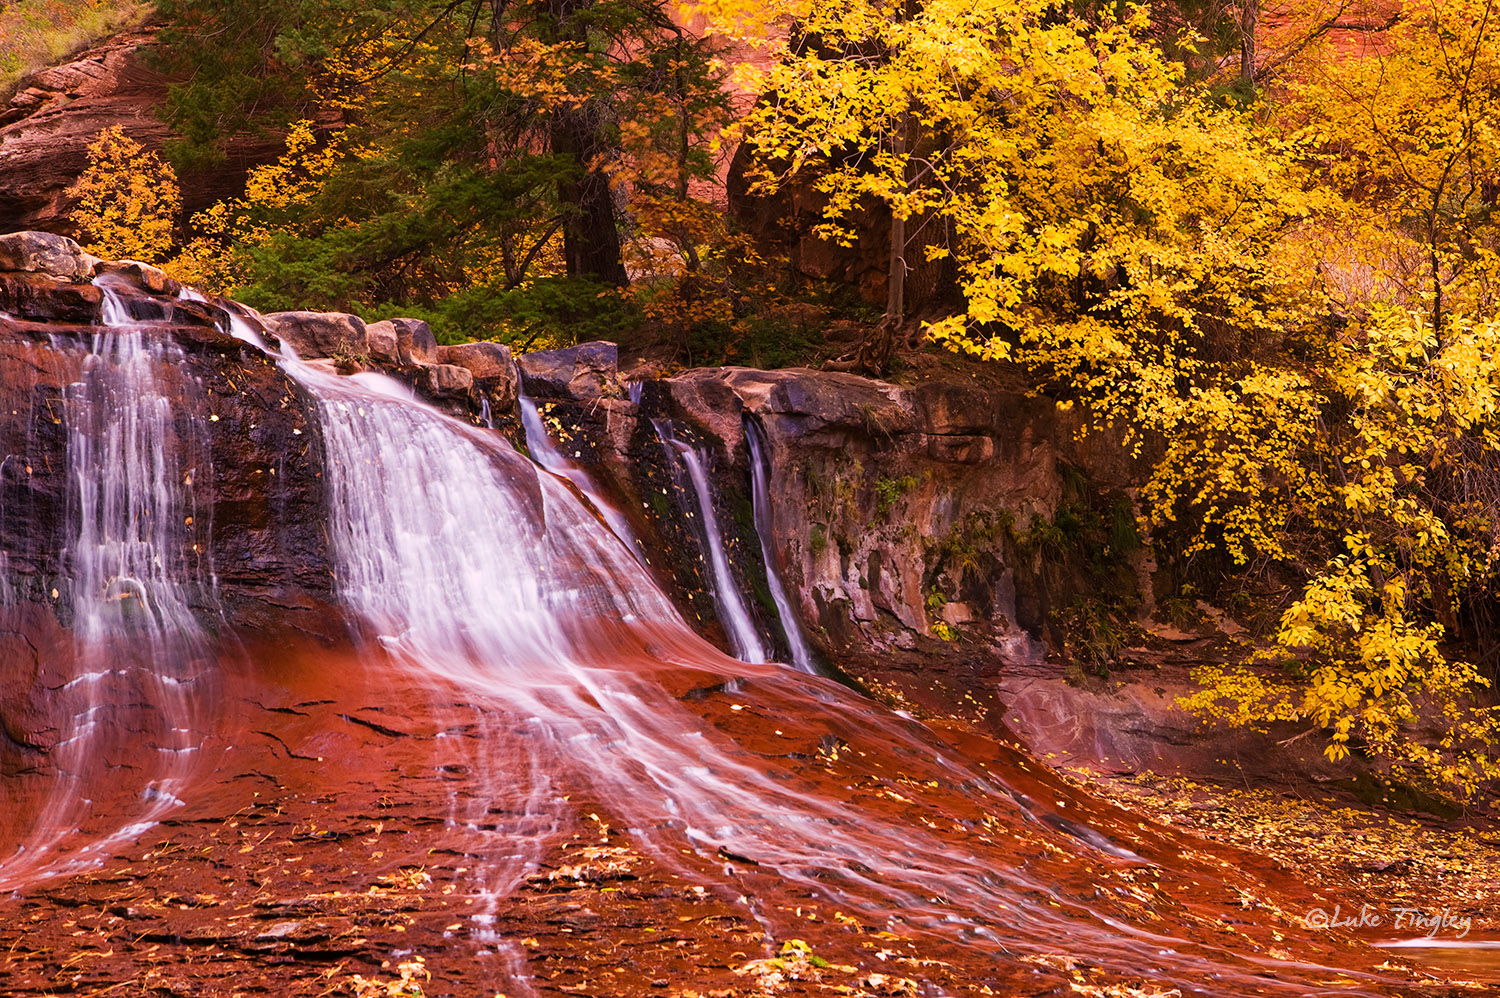 Backcountry, Zion National Park, Utah, waterfall, fall, autumn, yellow, sandstone, canyon, southwest, canyonlands, united states...